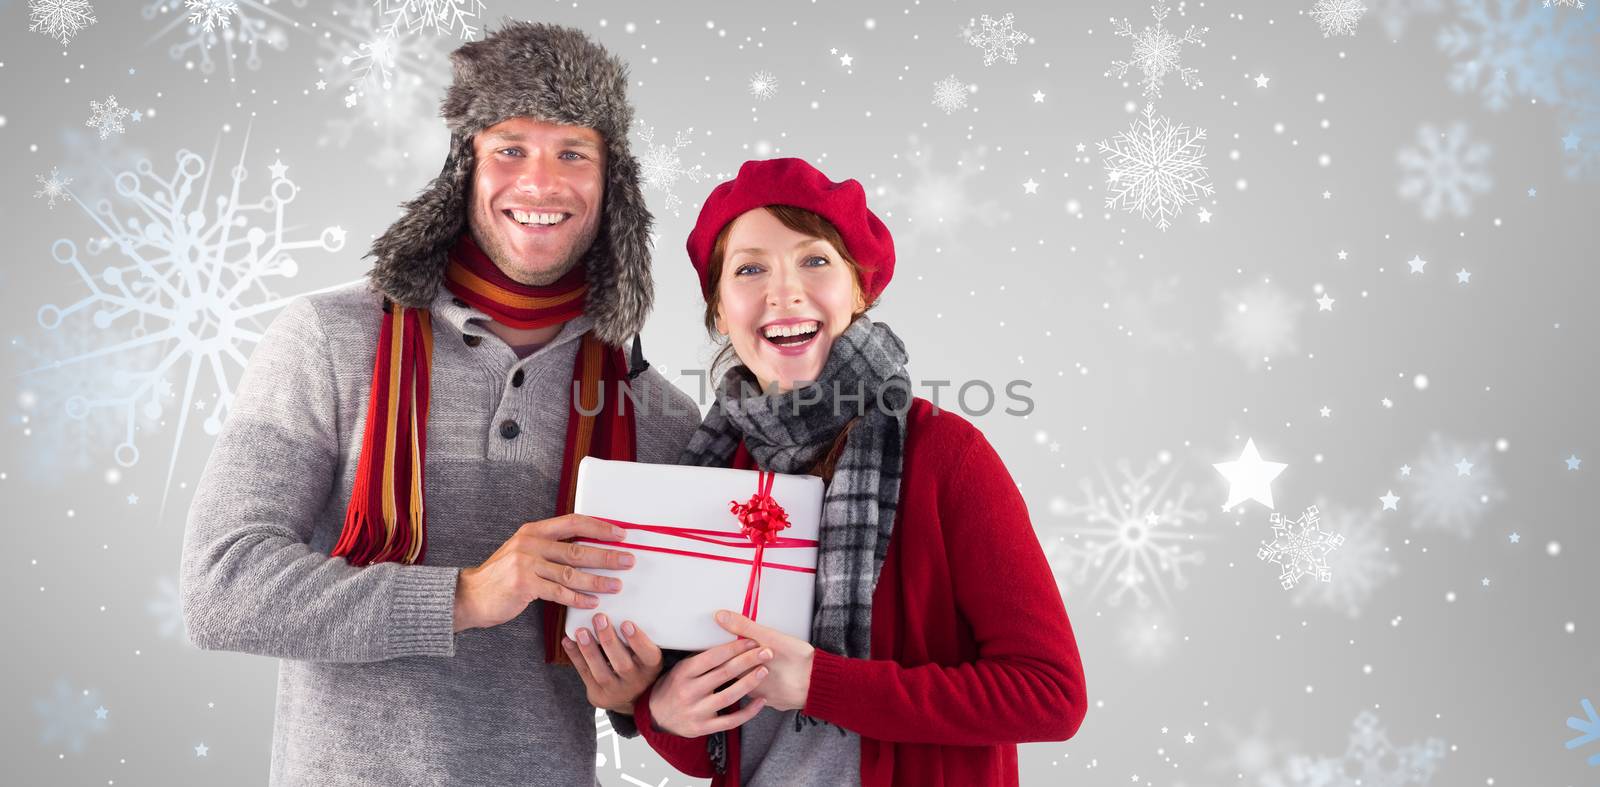 Couple smiling and holding gift against snowflake pattern